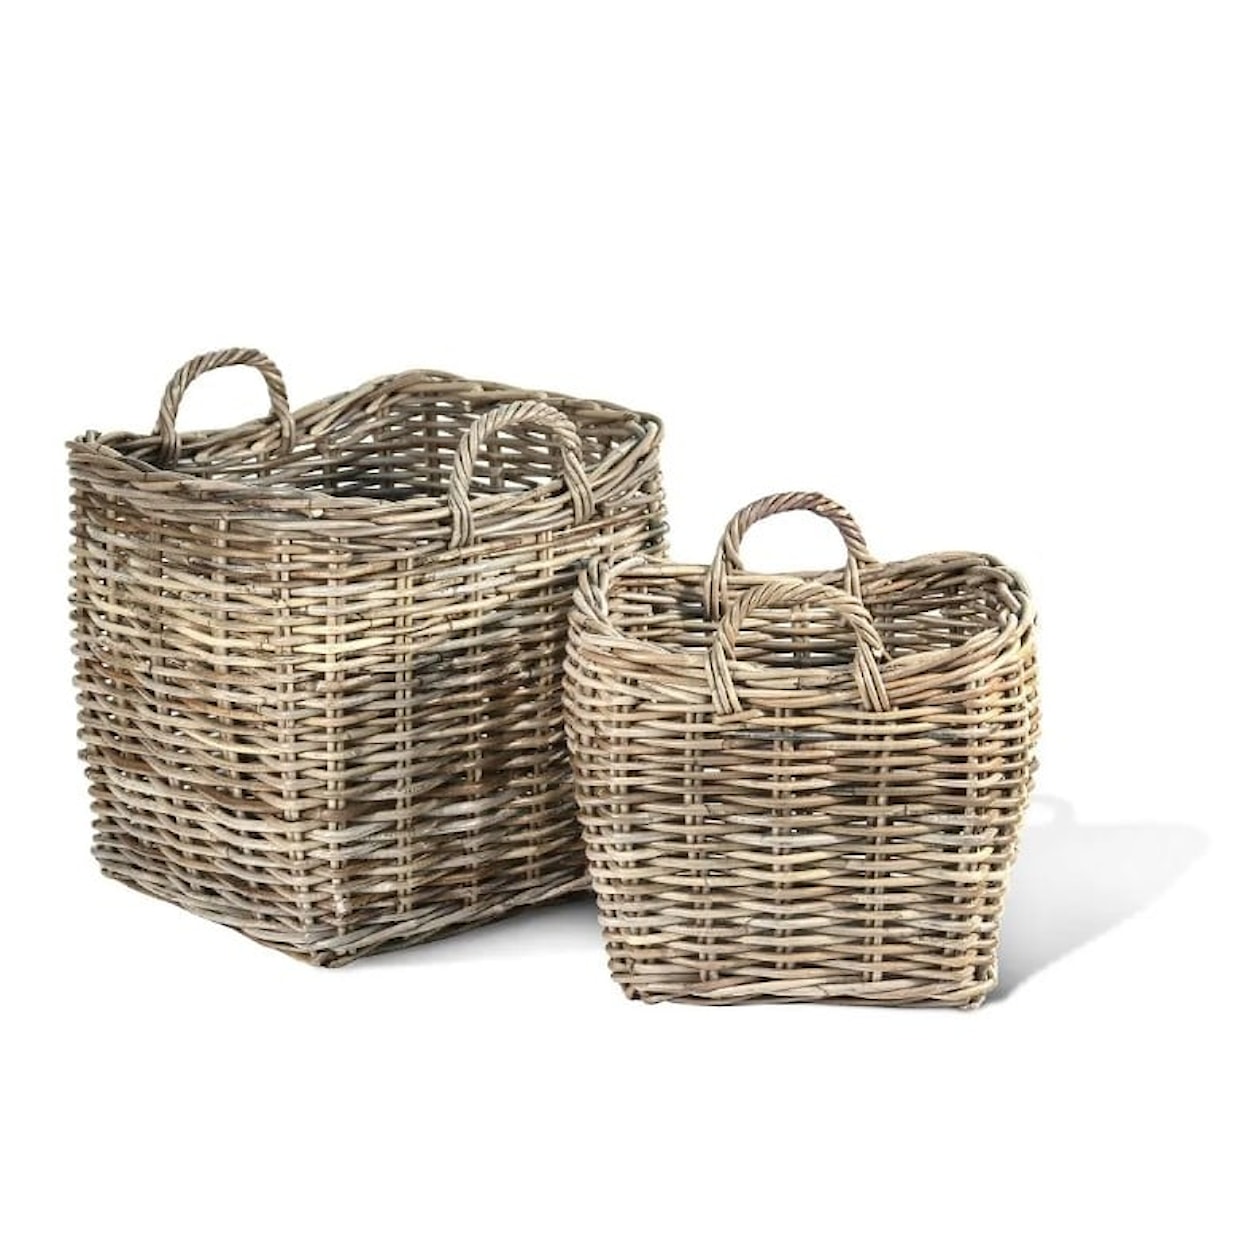 Ibolili Baskets and Sets FRENCH GRAY FIREPLACE BASKET, RECT- S/2